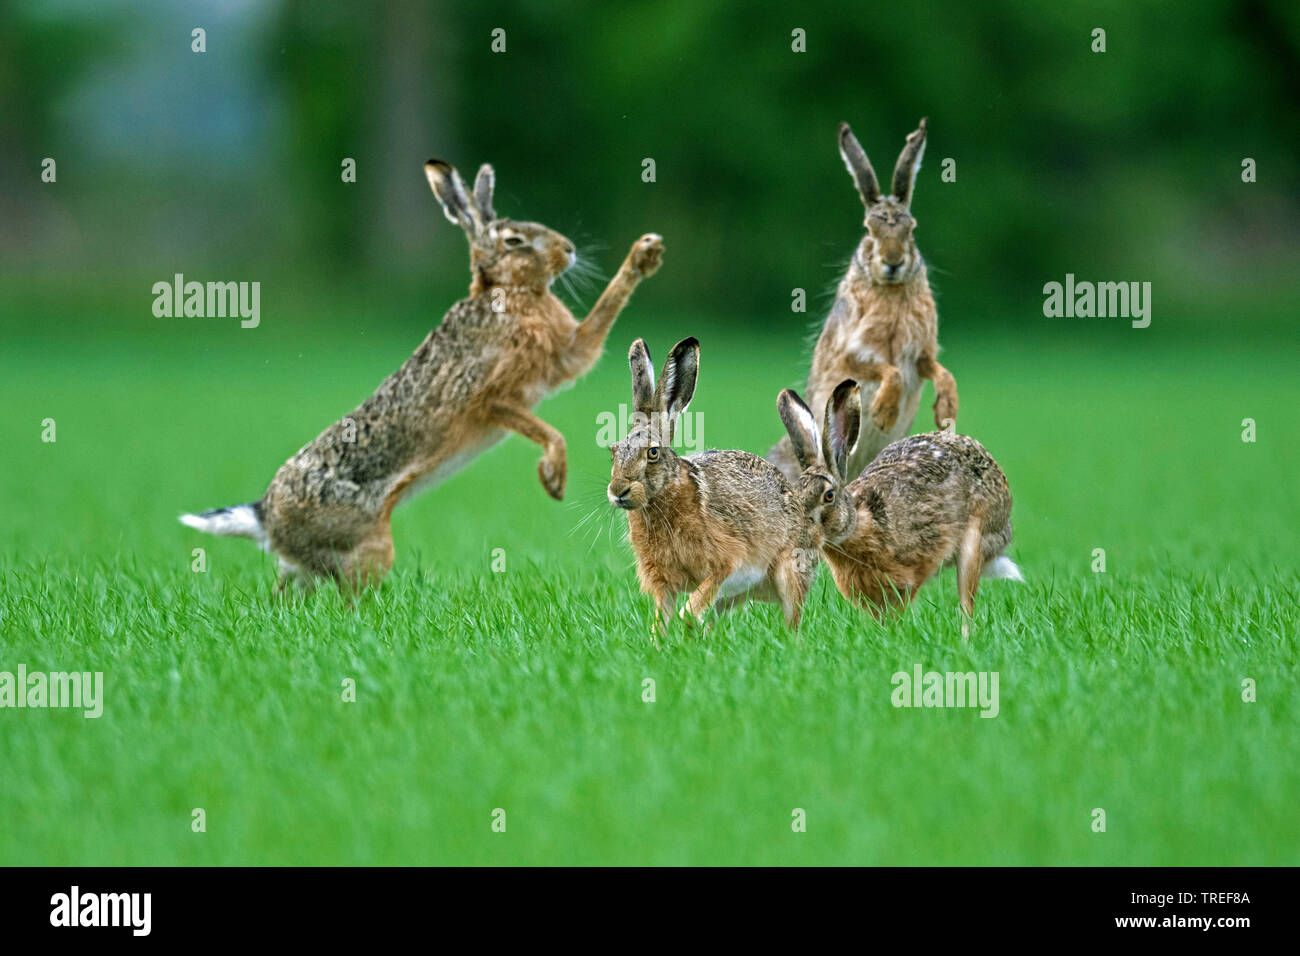 European hare, Brown hare (Lepus europaeus), group of fighting brown hares in a meadow, Austria, Burgenland, Neusiedler See National Park Stock Photo